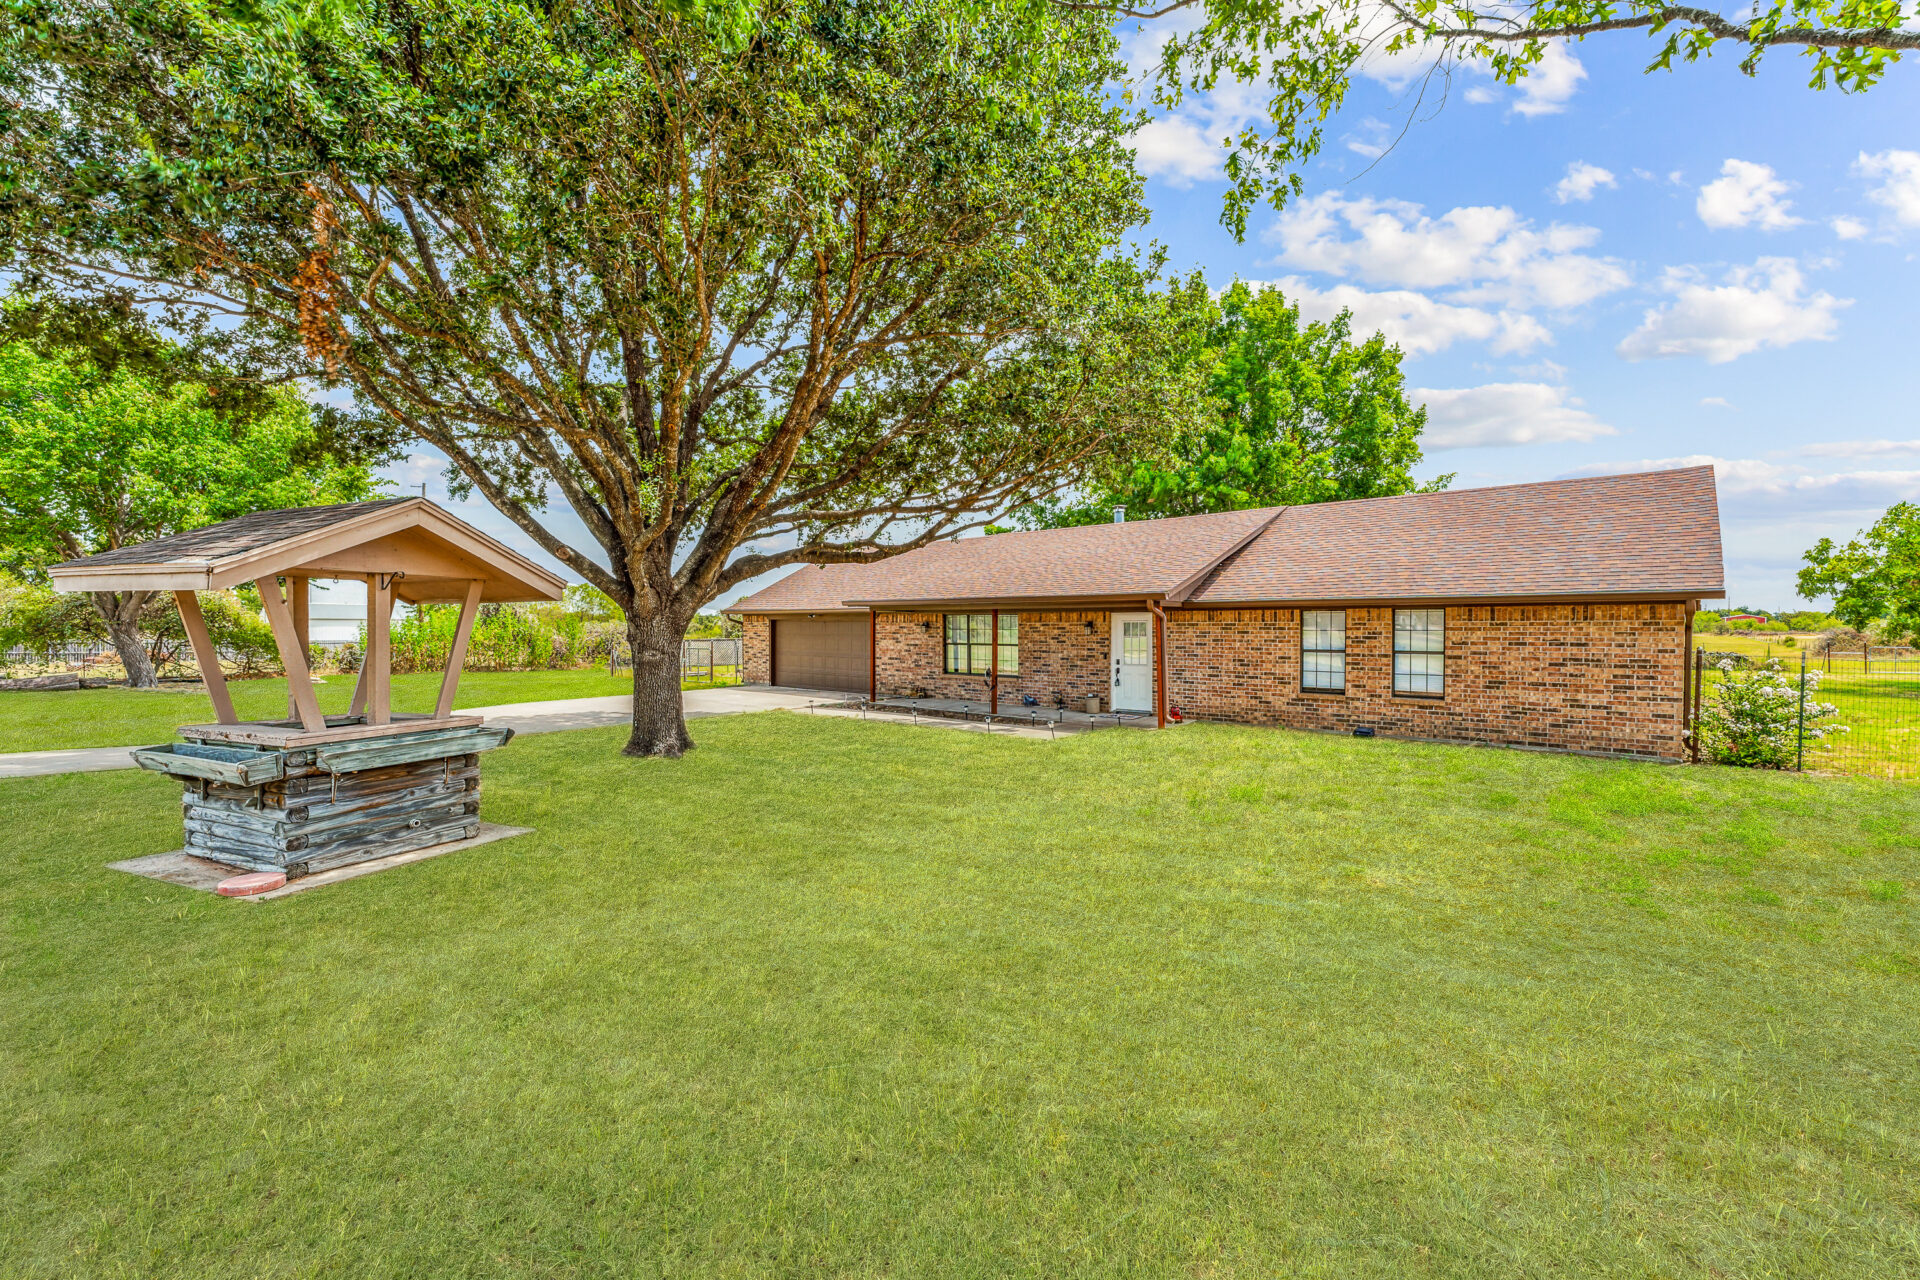 Newly Renovated Home on Perimeter-Fenced 5ac. Near DFW Metroplex